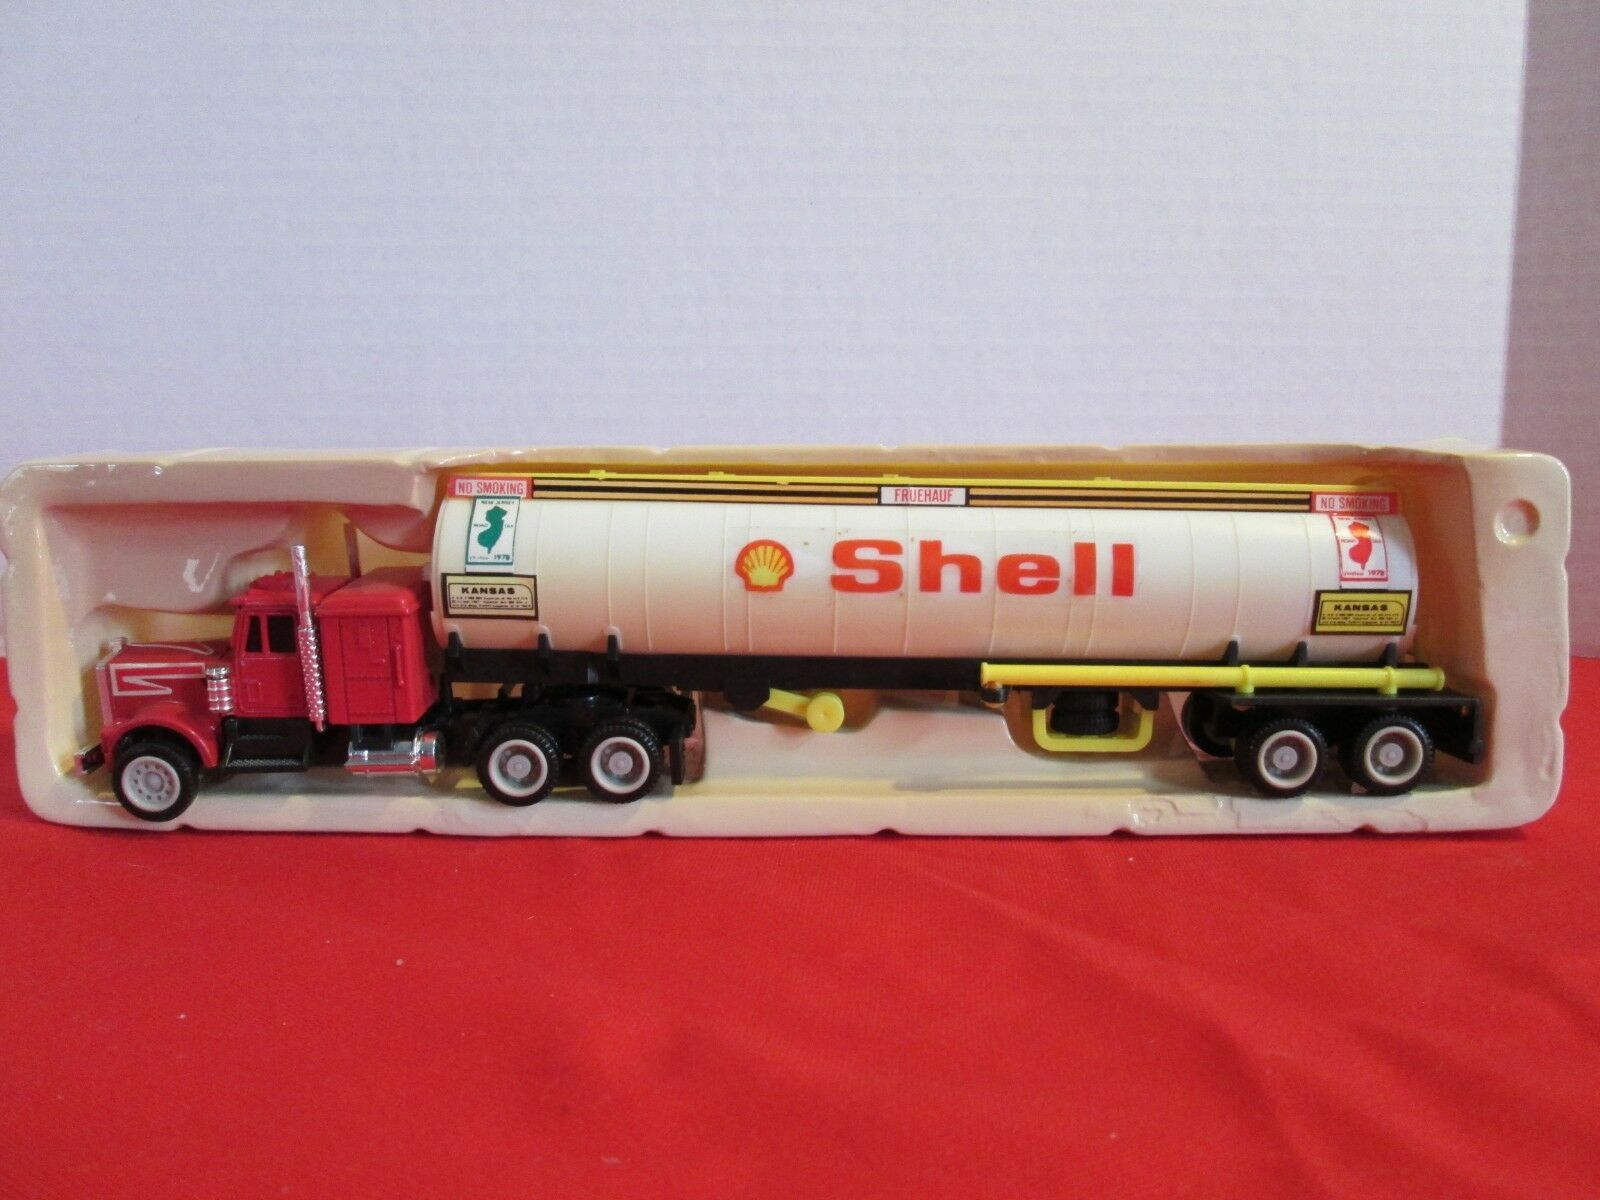 Tractor Trailer Series Road Monster - Shell Oil Truck Toy